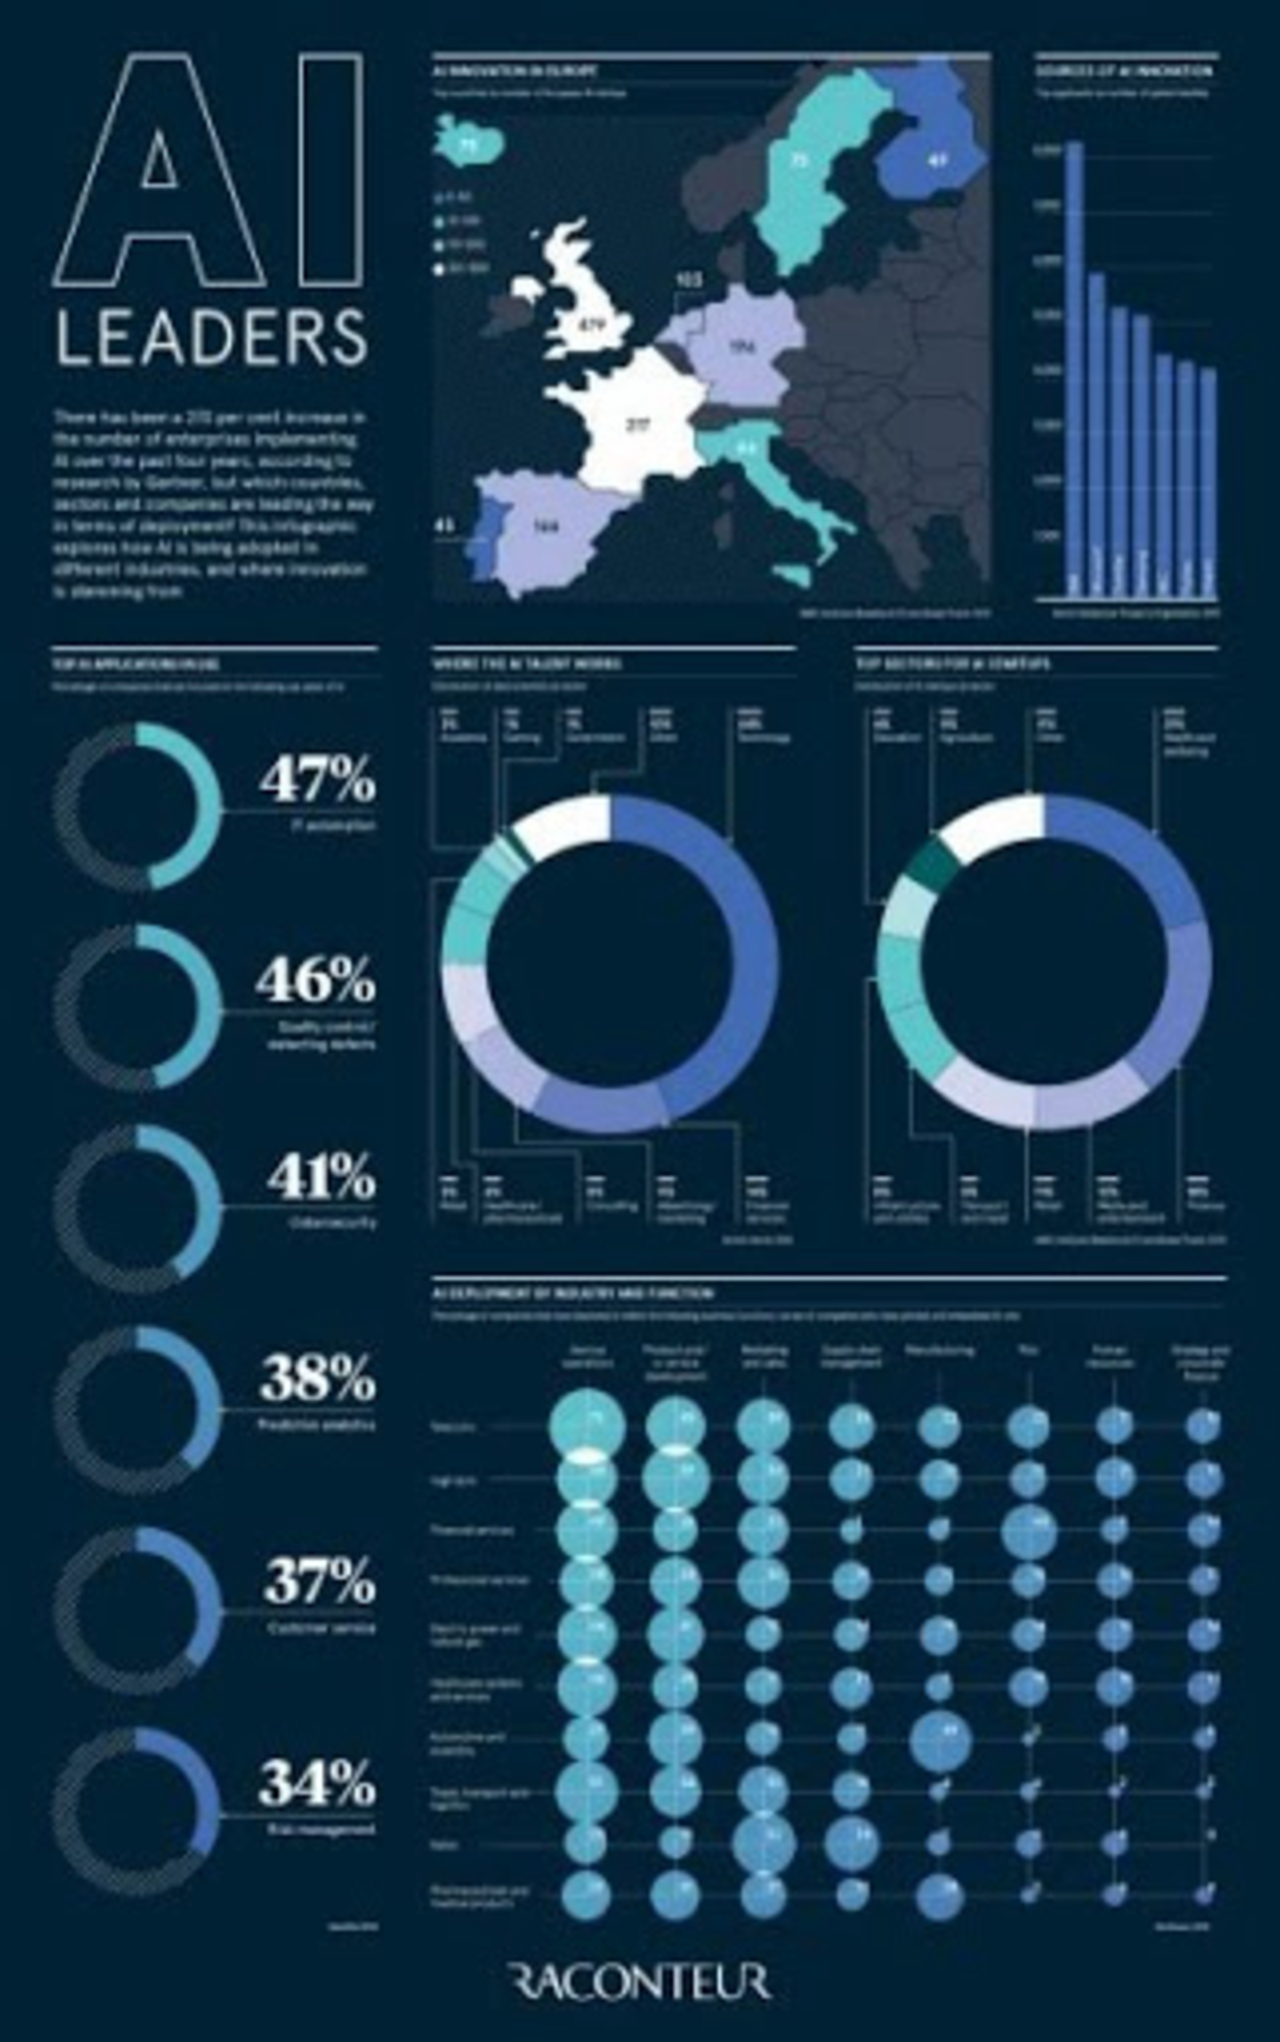 #AI Leaders by @raconteur @antgrasso Go to http://bit.ly/2zaHME0 #IoT #ArtificialIntelligence #InternetofThings #Digital #Analytics #DigitalTransformation #Tech #Technology #Banking #Finance #Innovation #Business Cc: @timothy_hughes @stephanenappo @7wdata https://t.co/hcjp8zhZW5